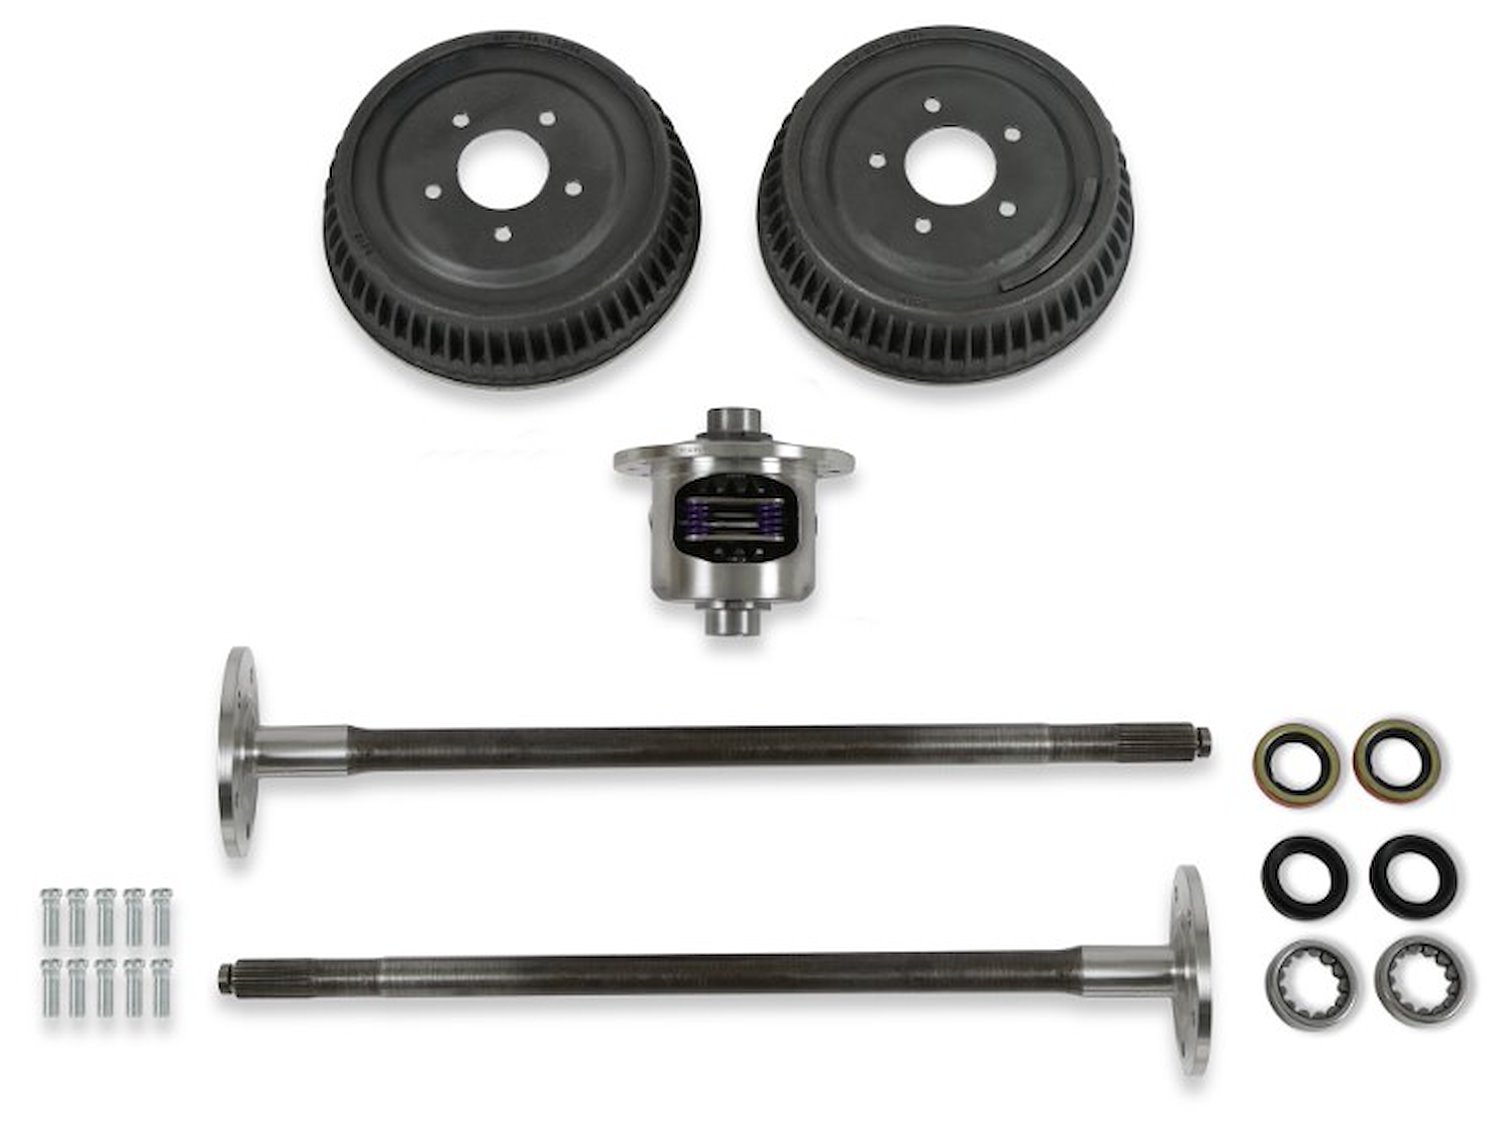 5-Lug Conversion Rear Axle Kit for 1963-1969 Chevy, GMC Trucks/SUVs 2WD/4WD w/Limited Slip Differential for 3.73 Gears & Above